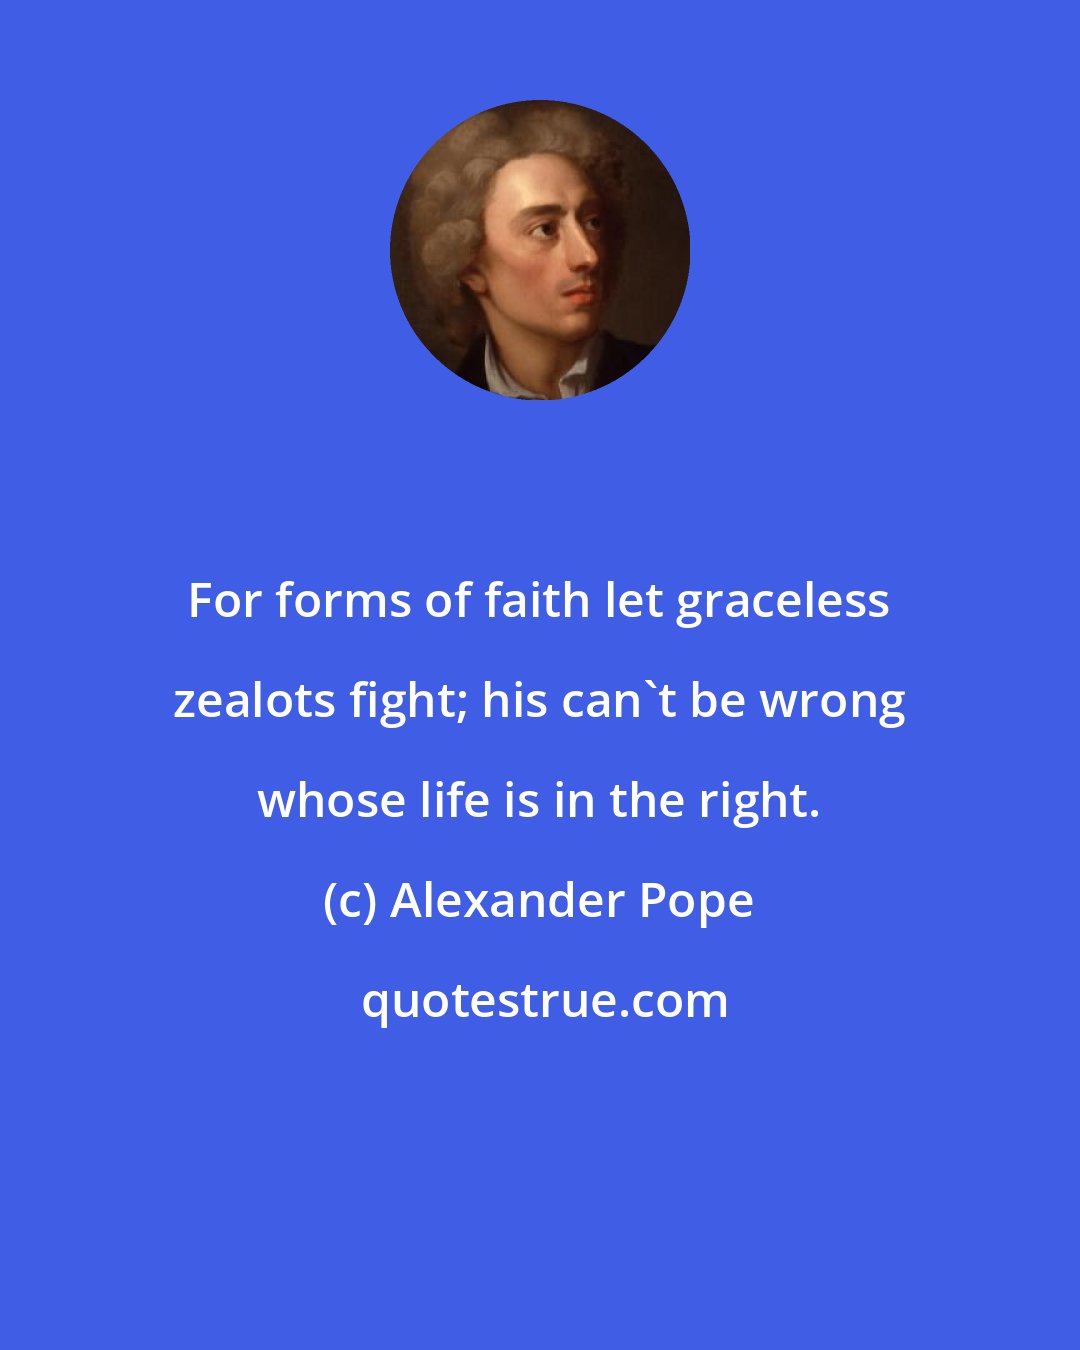 Alexander Pope: For forms of faith let graceless zealots fight; his can't be wrong whose life is in the right.